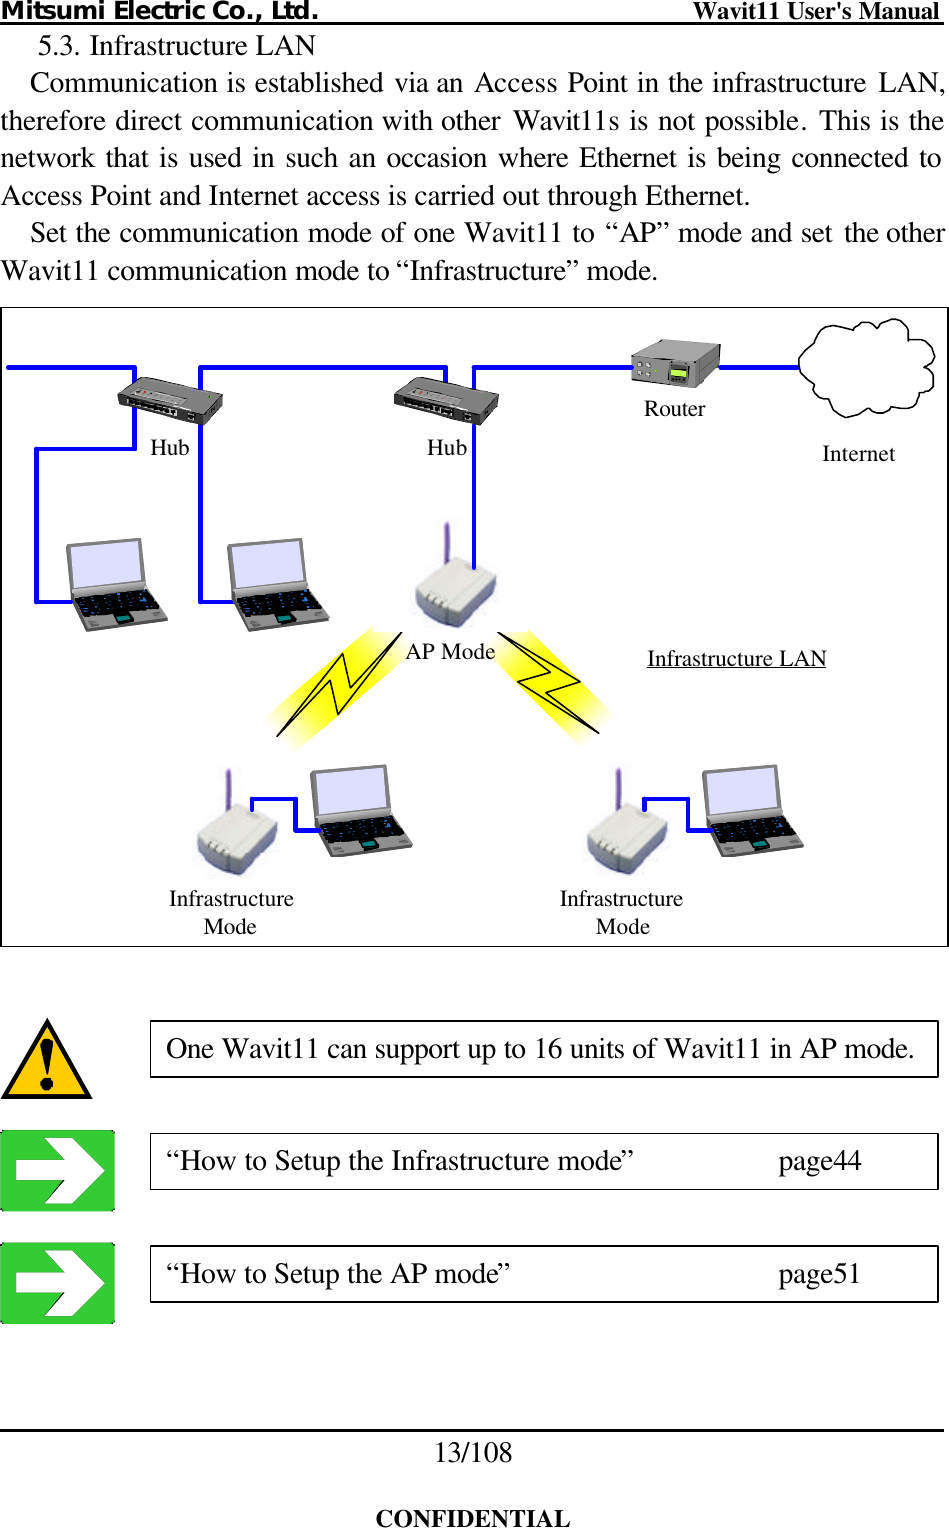 Mitsumi Electric Co., Ltd.                              Wavit11 User&apos;s Manual 13/108  CONFIDENTIAL 5.3. Infrastructure LAN Communication is established via an Access Point in the infrastructure LAN, therefore direct communication with other  Wavit11s is not possible. This is the network that is used in such an occasion where Ethernet is being connected to Access Point and Internet access is carried out through Ethernet. Set the communication mode of one Wavit11 to “AP” mode and set the other Wavit11 communication mode to “Infrastructure” mode. AP ModeInfrastructureModeInfrastructureModeInfrastructure LANRouterHub InternetHub     One Wavit11 can support up to 16 units of Wavit11 in AP mode. “How to Setup the Infrastructure mode”    page44 “How to Setup the AP mode”    page51 